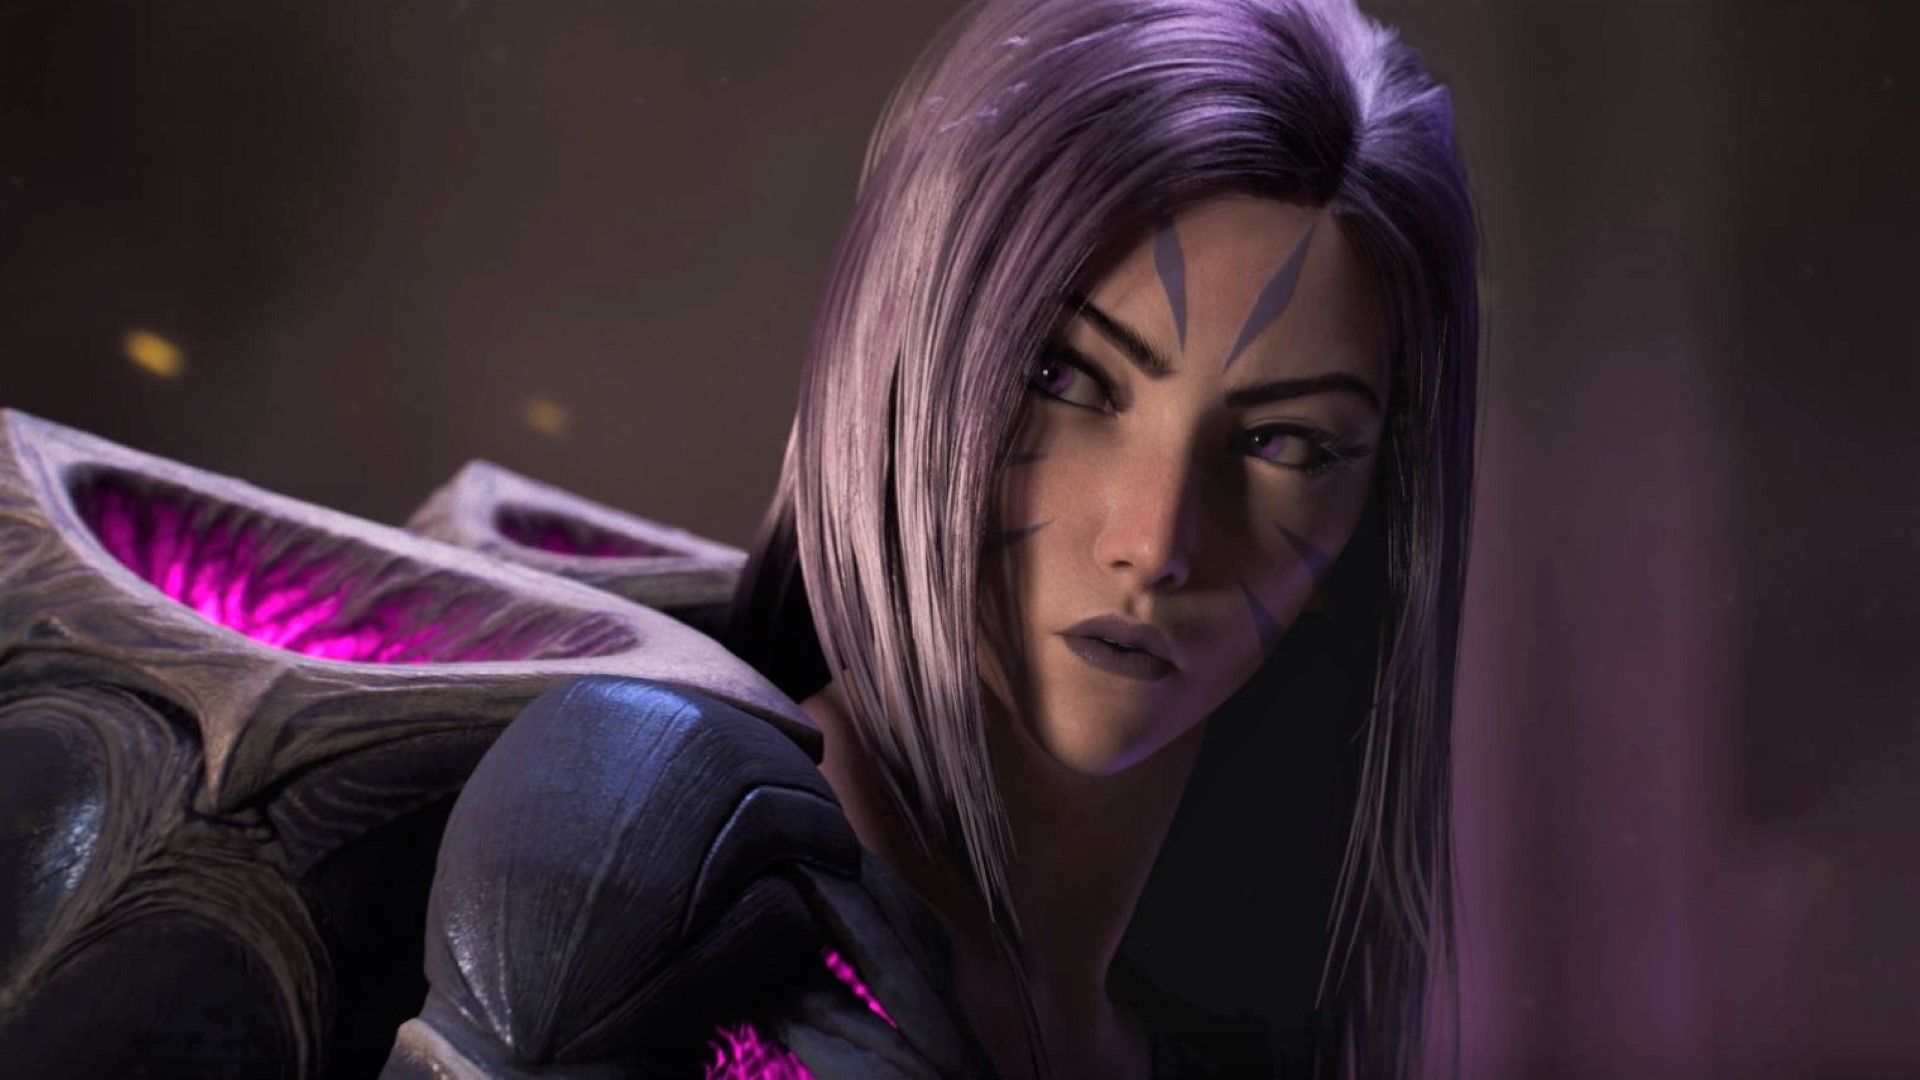 Check out League of Legends' Season 10 cinematic here